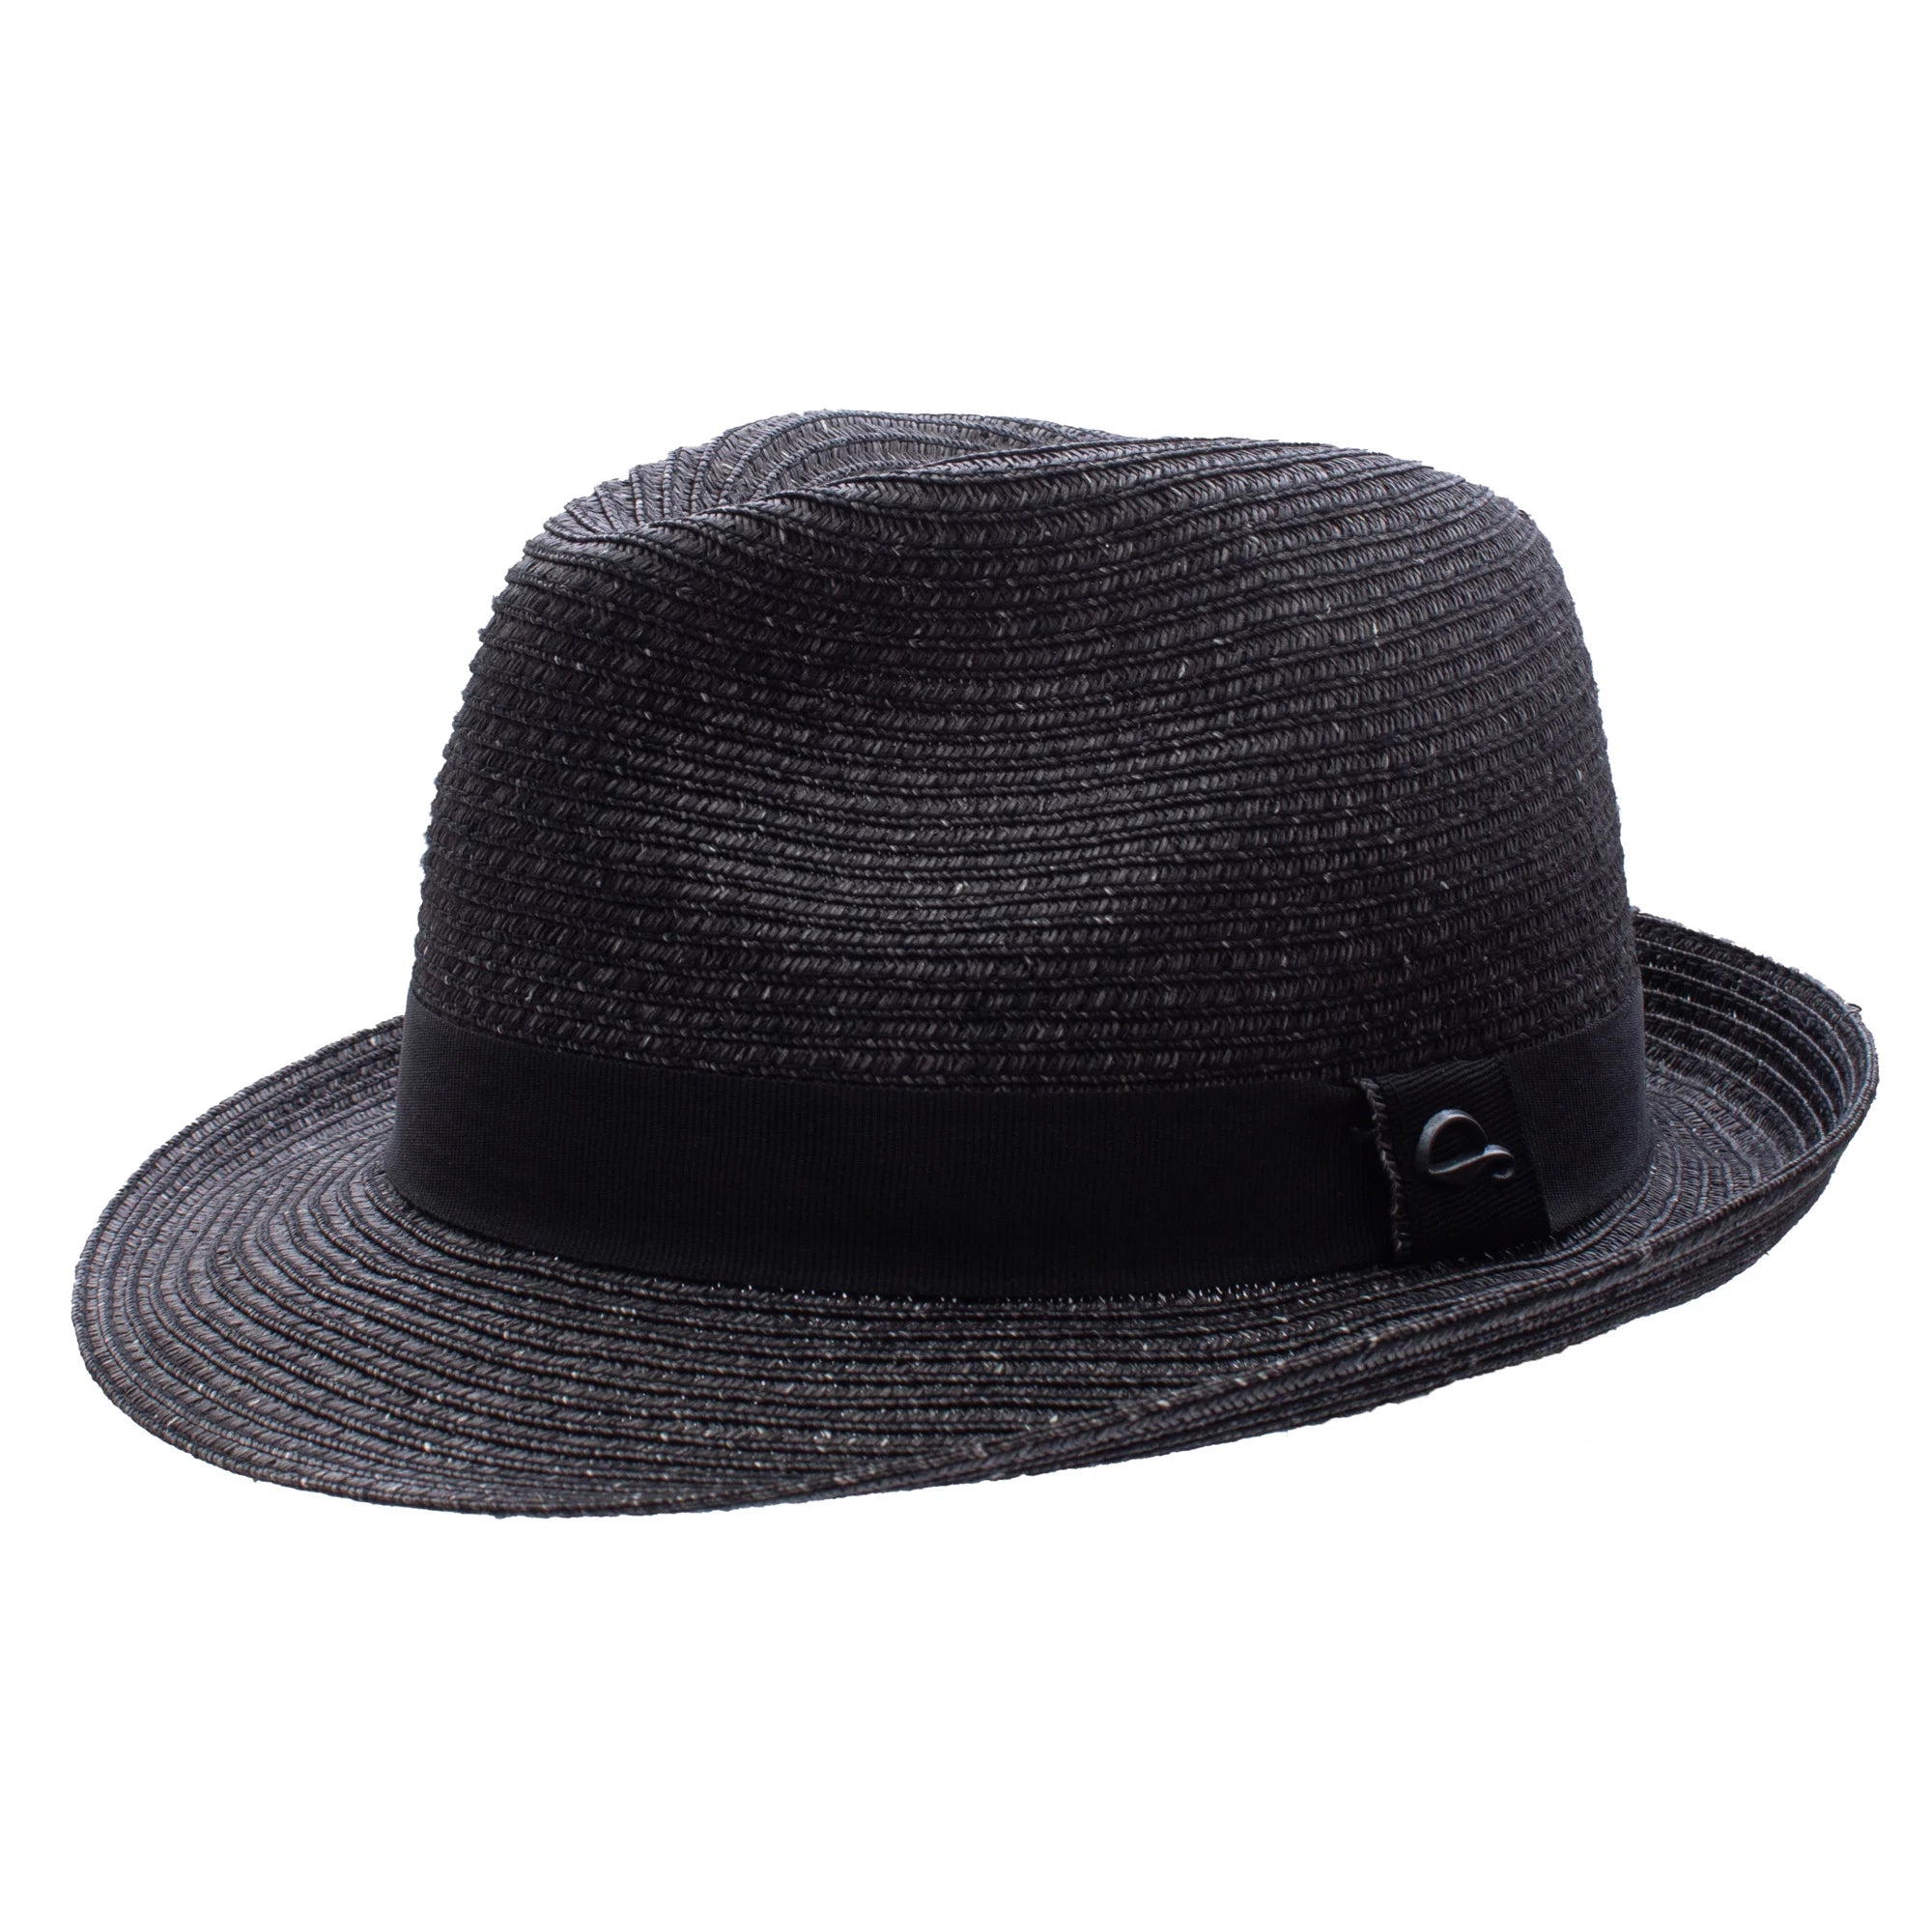 The Harrison Hat from Göttmann, with its supple, darker colored 100% paper straw and versatile style, is exactly what you need!